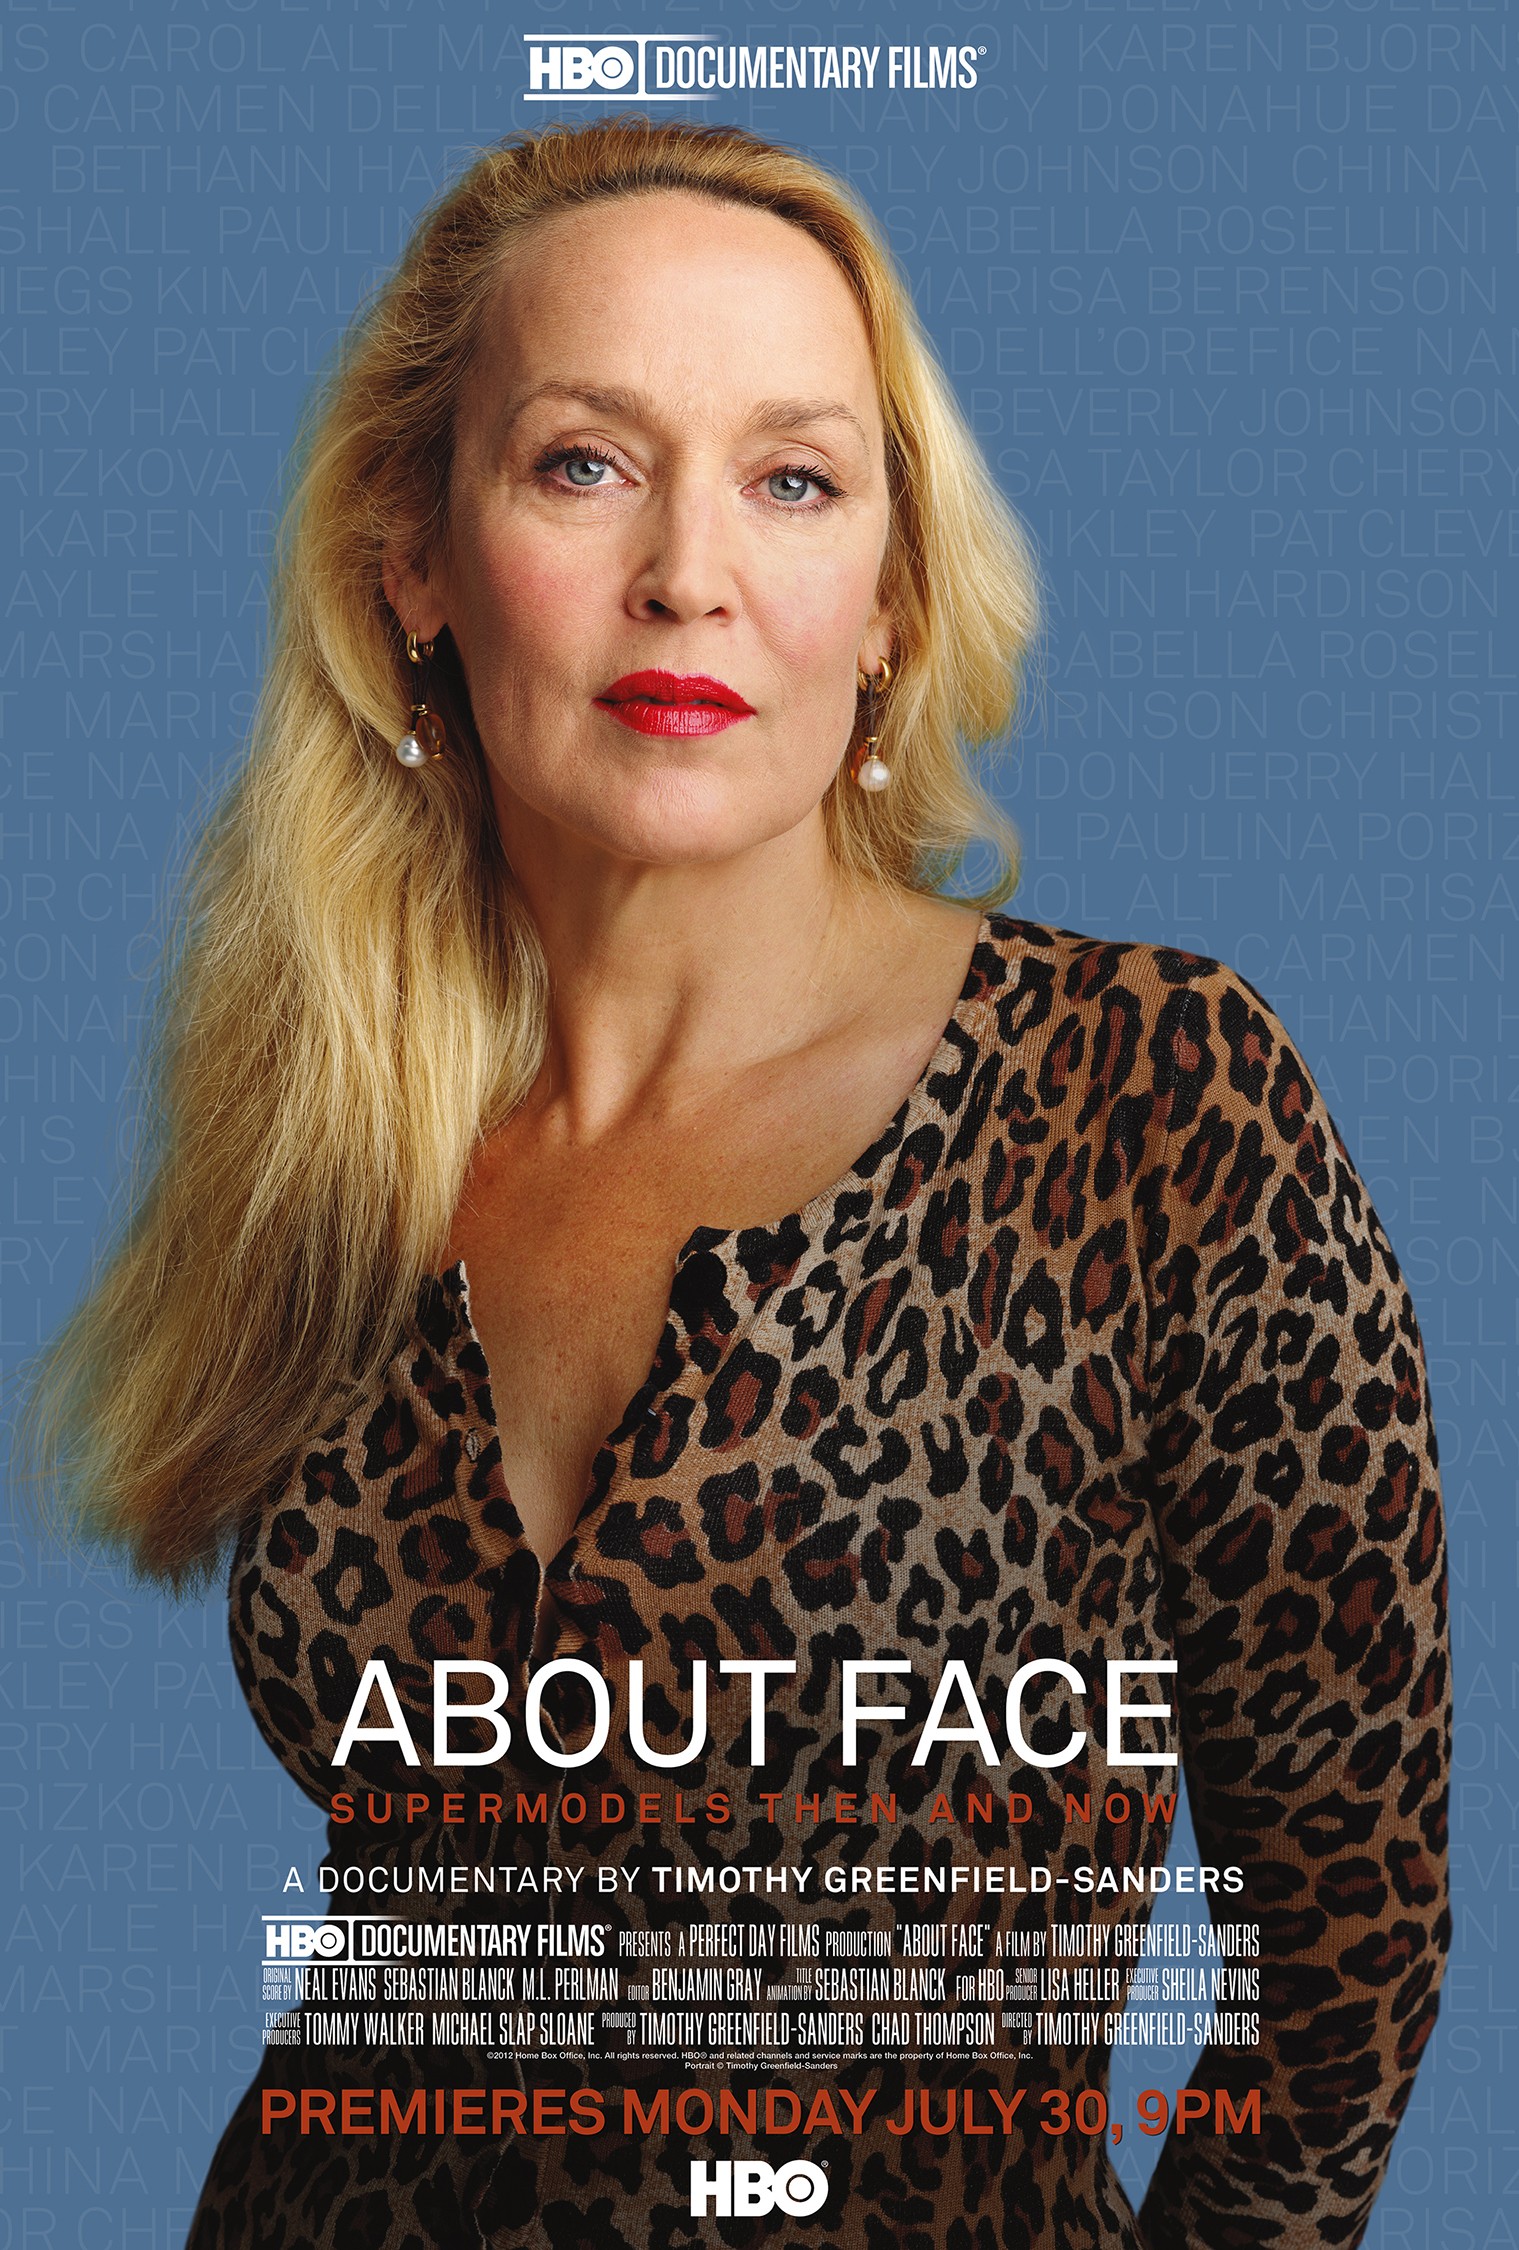 Mega Sized TV Poster Image for About Face: Supermodels Then and Now (#5 of 7)